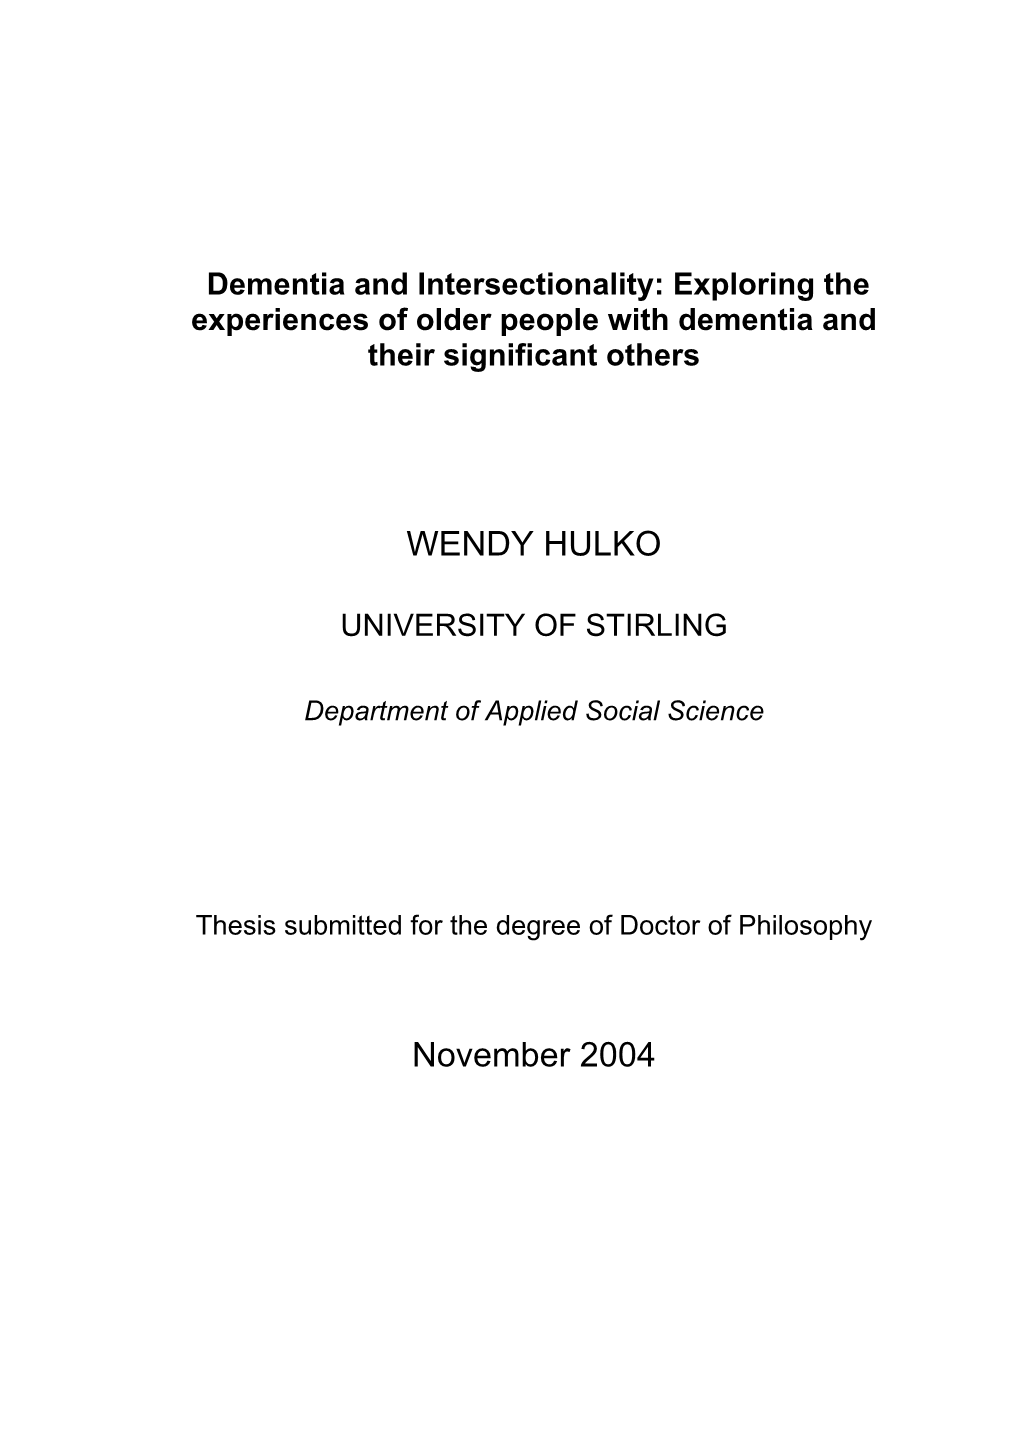 Dementia and Intersectionality: Exploring the Experiences of Older People with Dementia and Their Significant Others